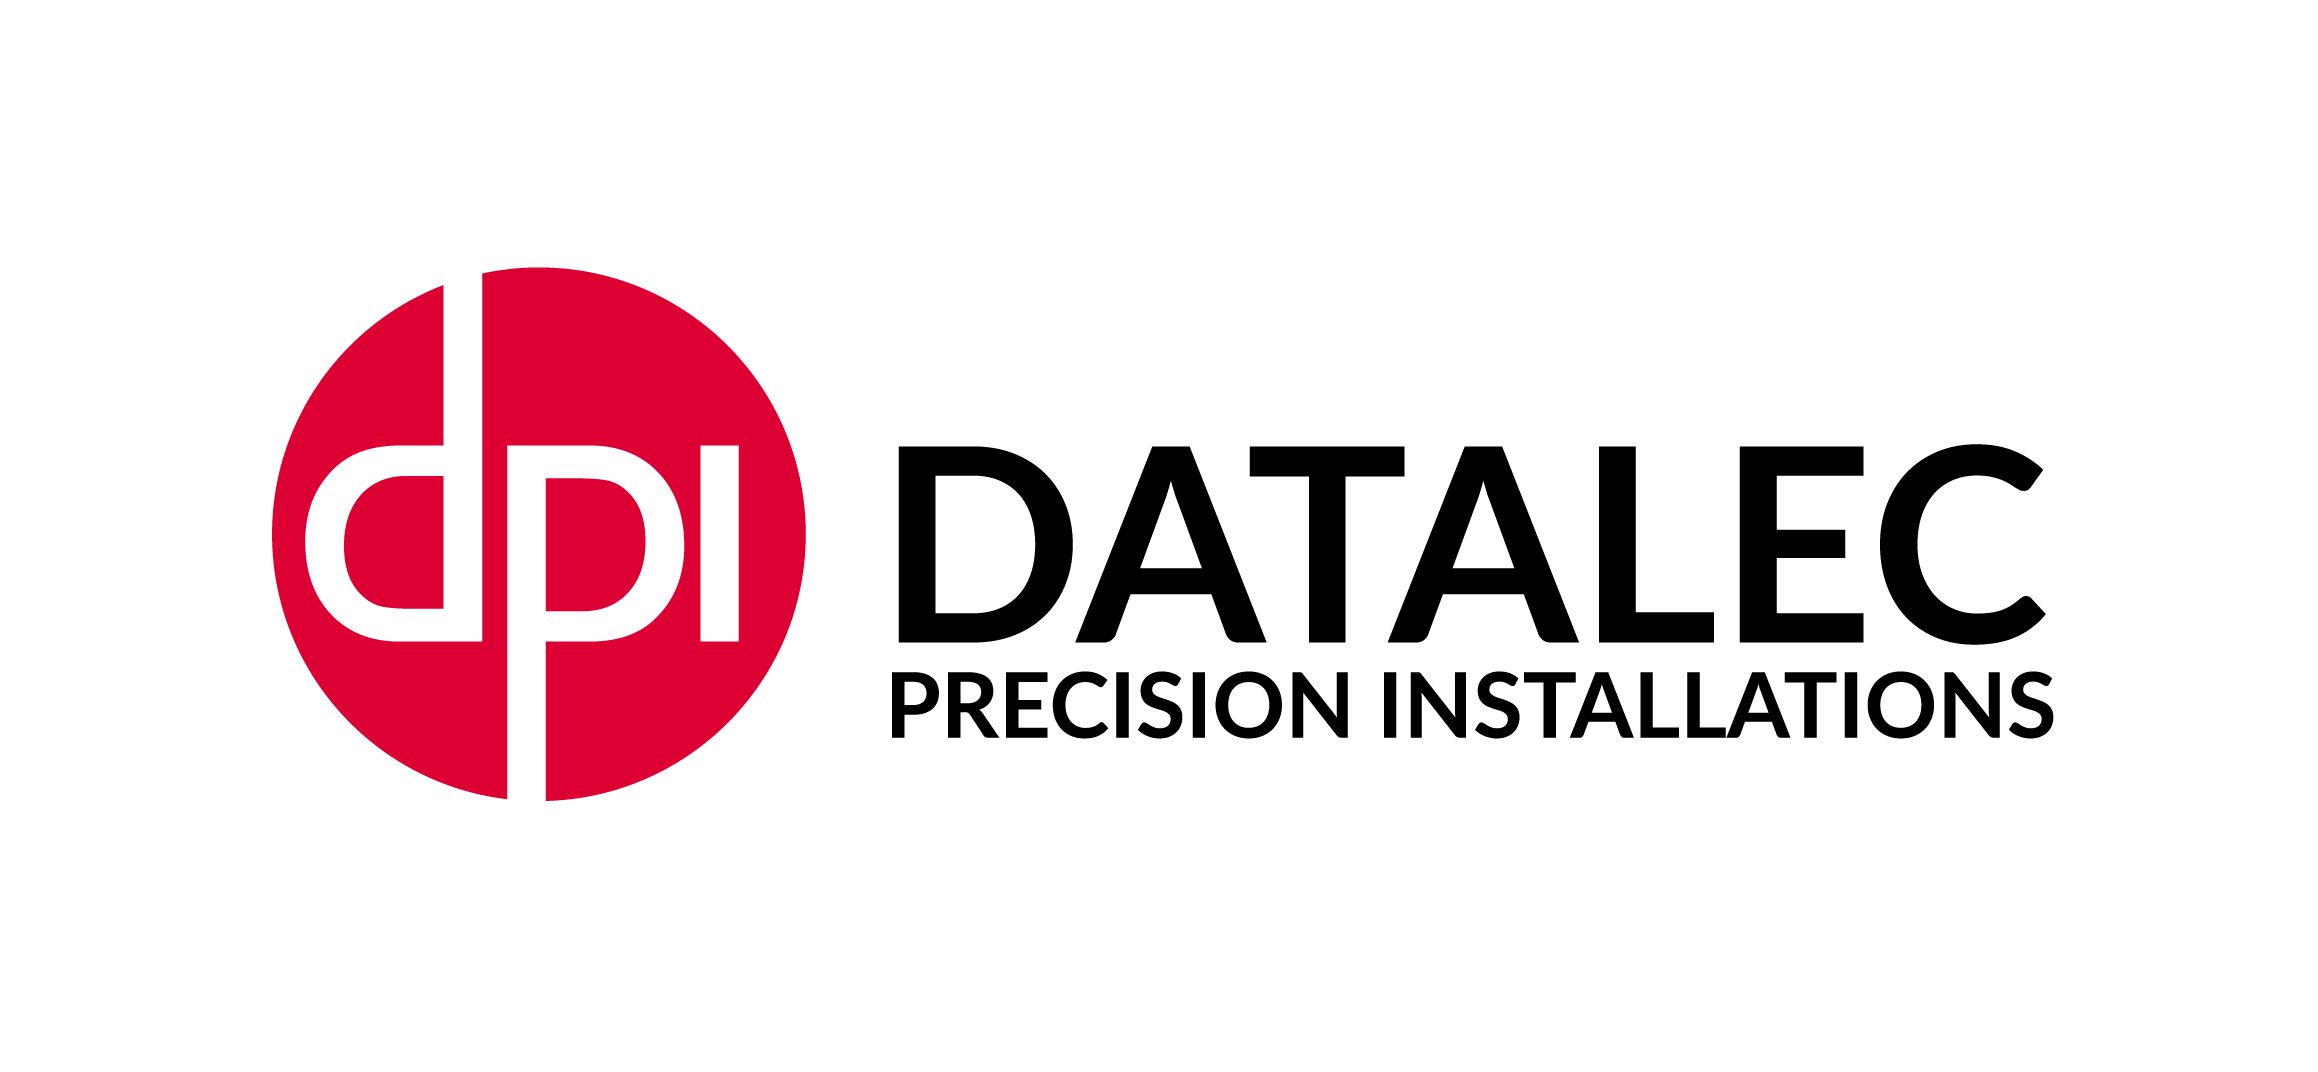 Datalec Precision Installations to Showcase Managed Services and LED Lighting Solutions at Data Centre World 2022